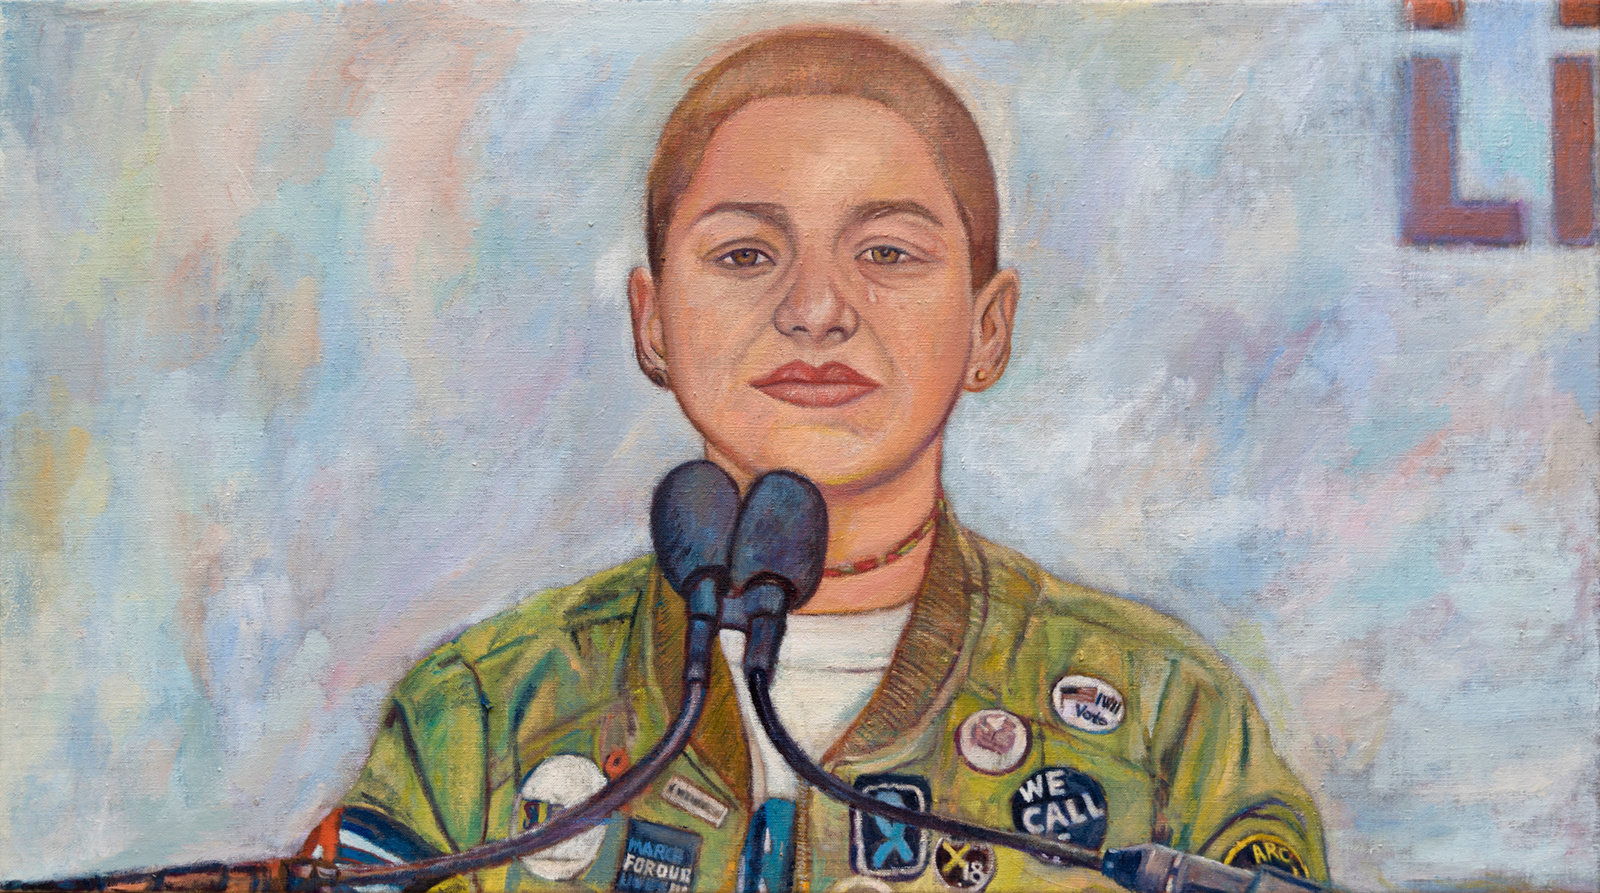 Mayerson, emma gonzalez, march for our lives, 2018, oil on linen, 20 x 36 in., 50.8 x 91.4 cm, cnon 60.611